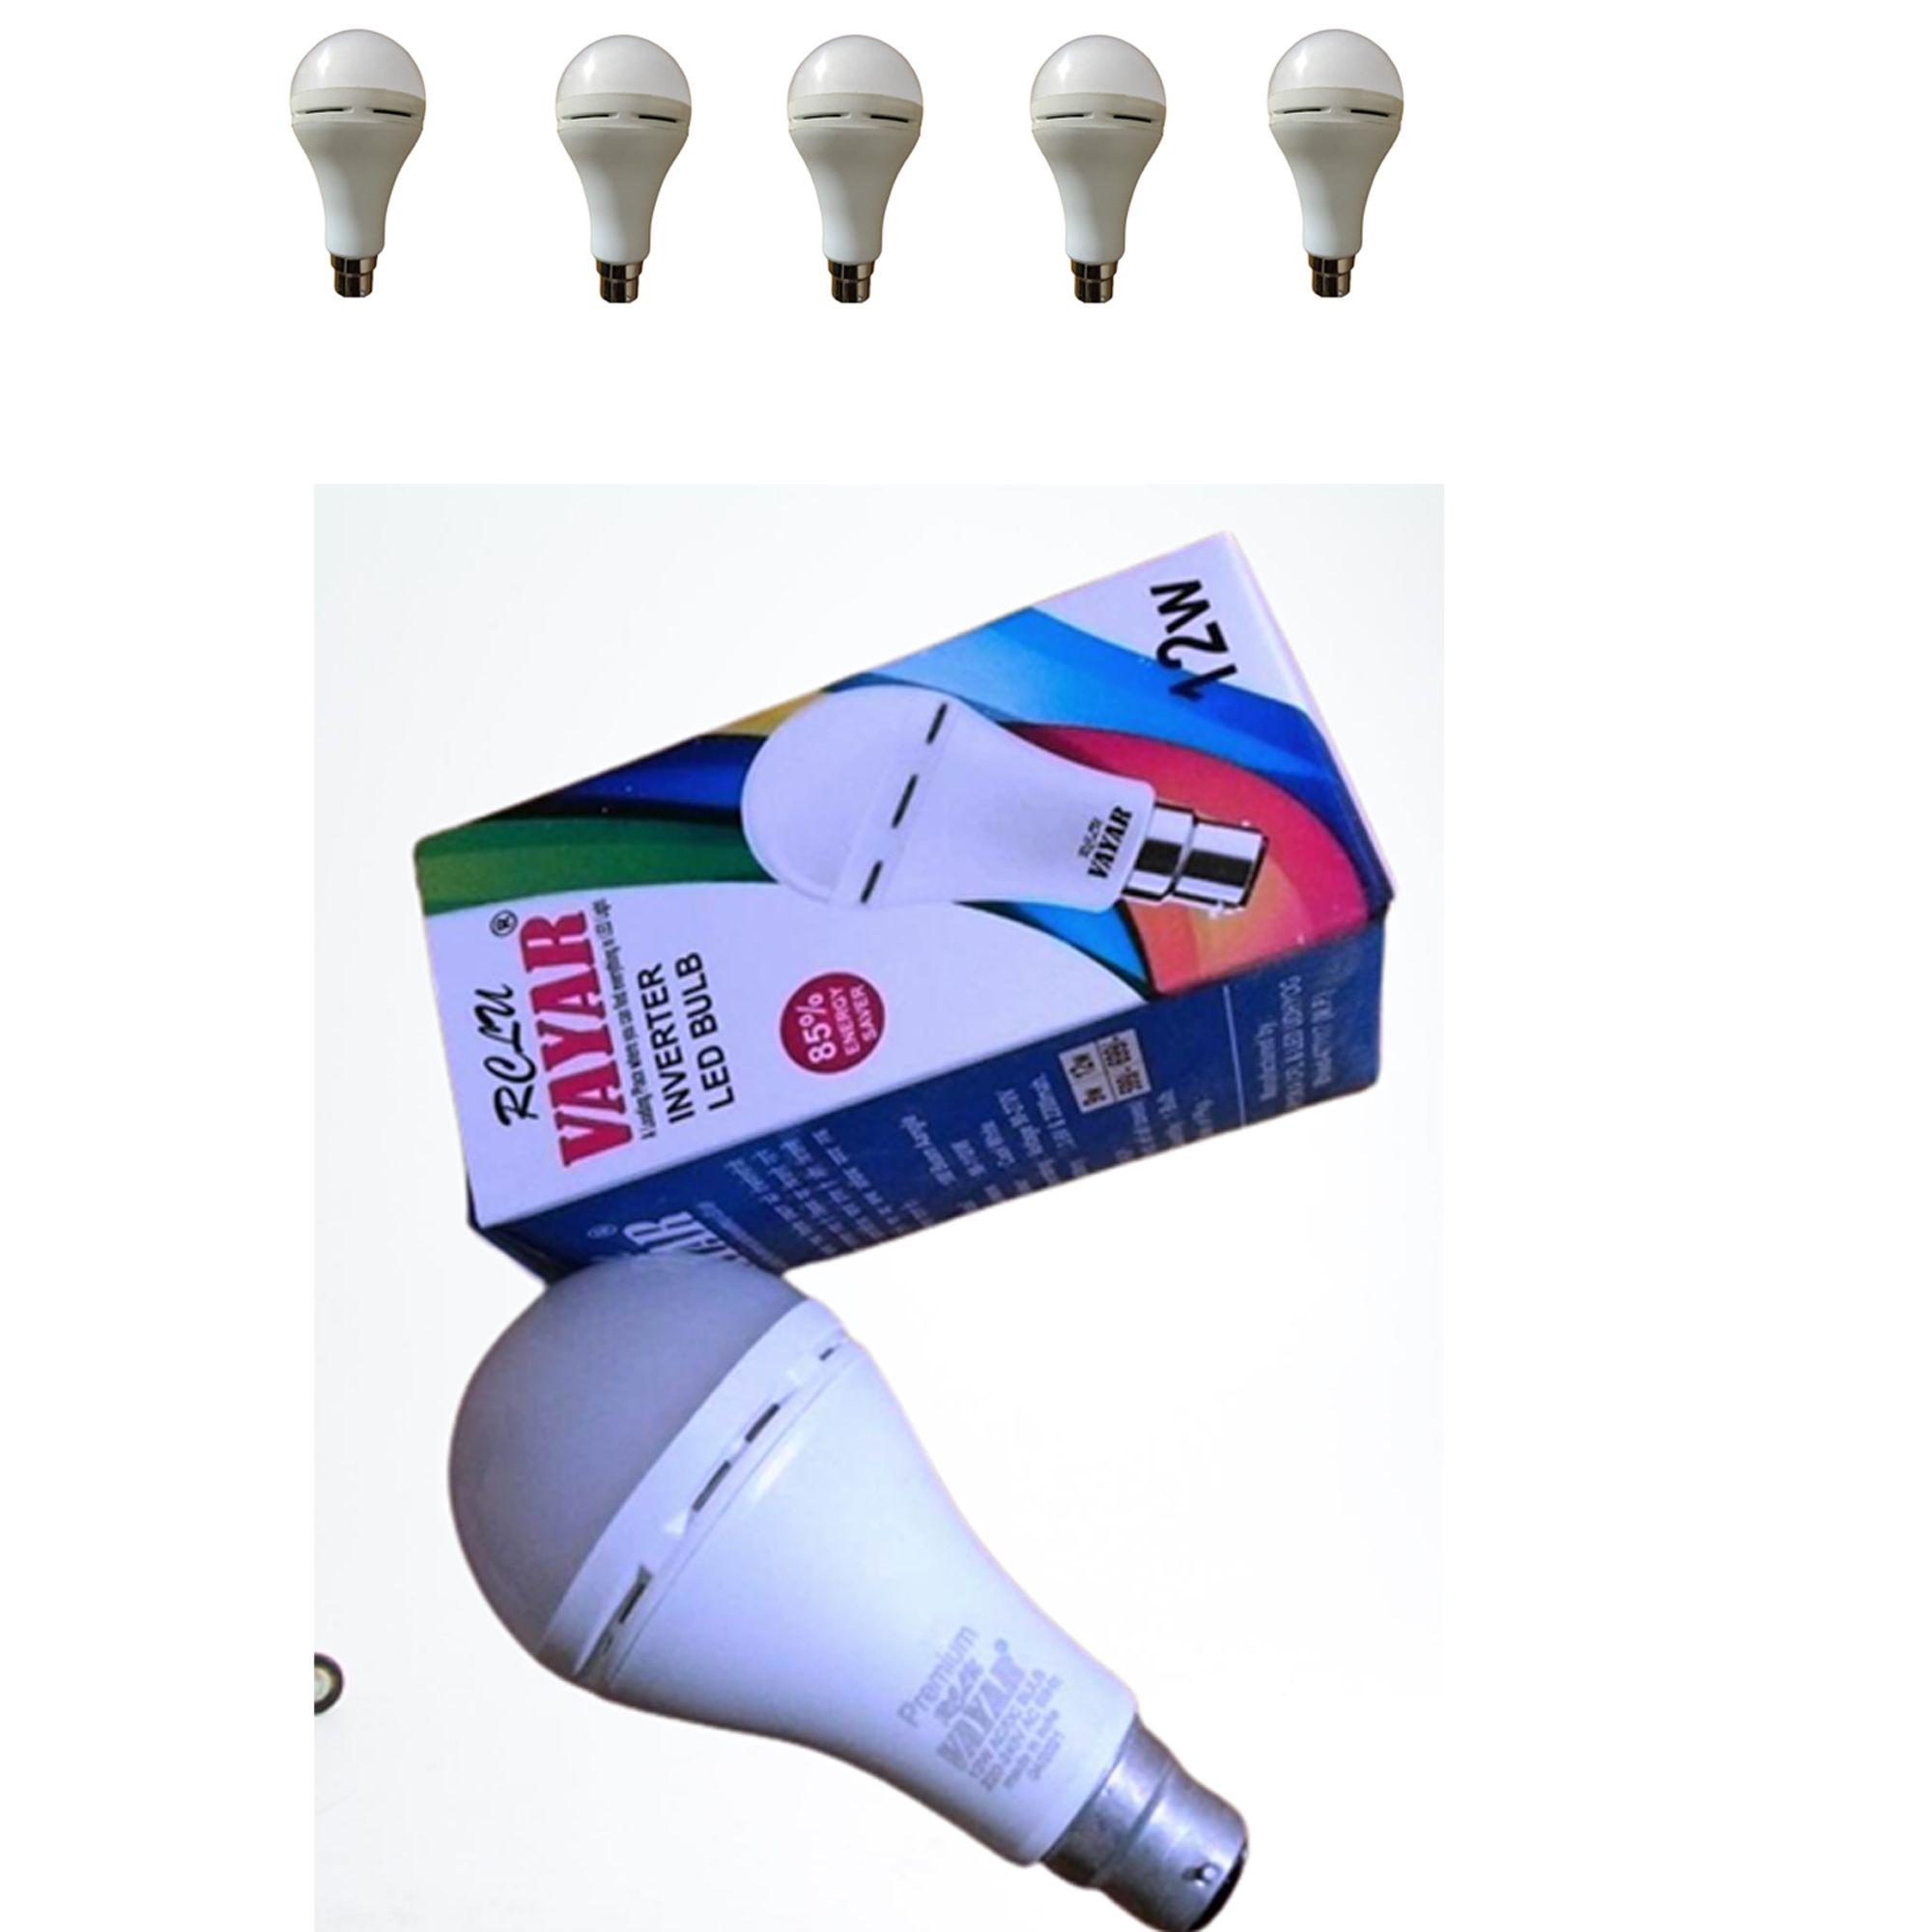 RECHARGEABLE BULB 12W